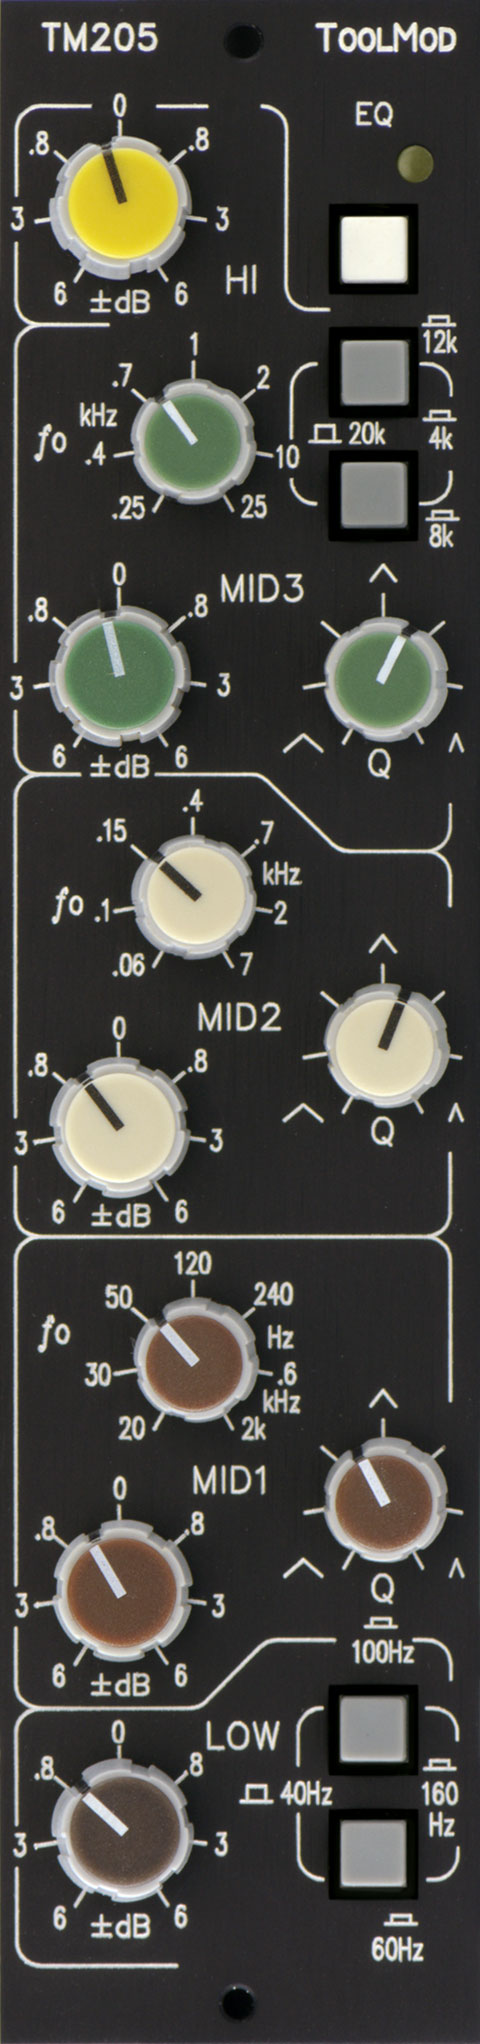 Stereo Mastering Equalizer with 6 dB Control Range, vertical Version